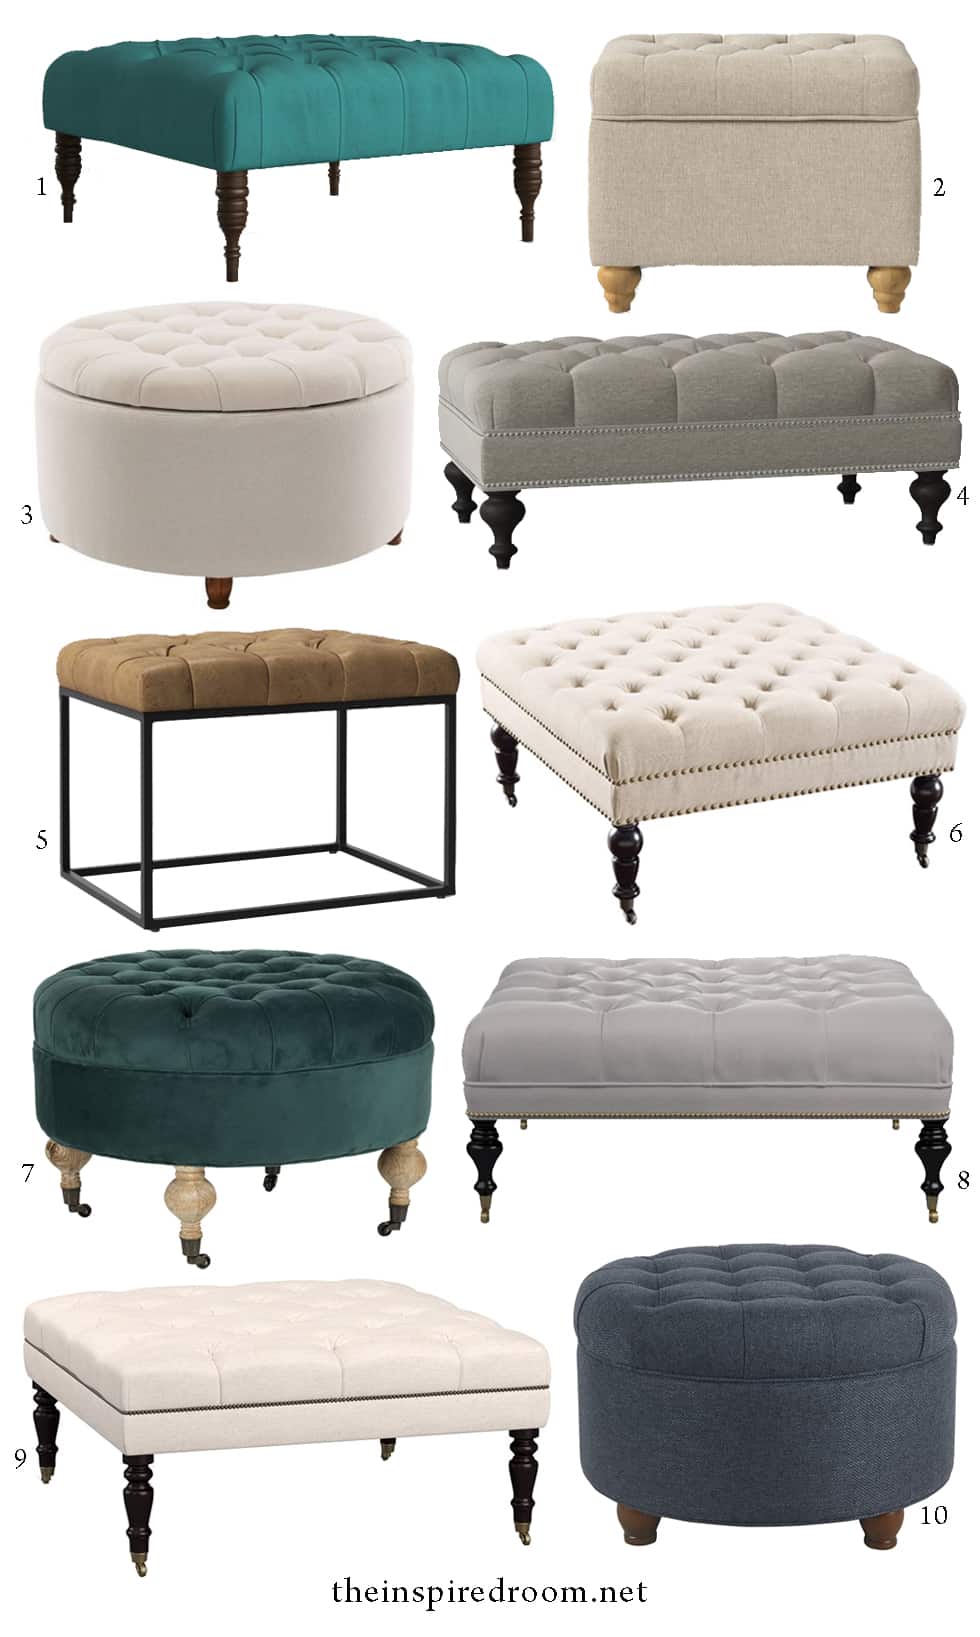 10 Tufted Ottomans (Instead of Coffee Tables!)